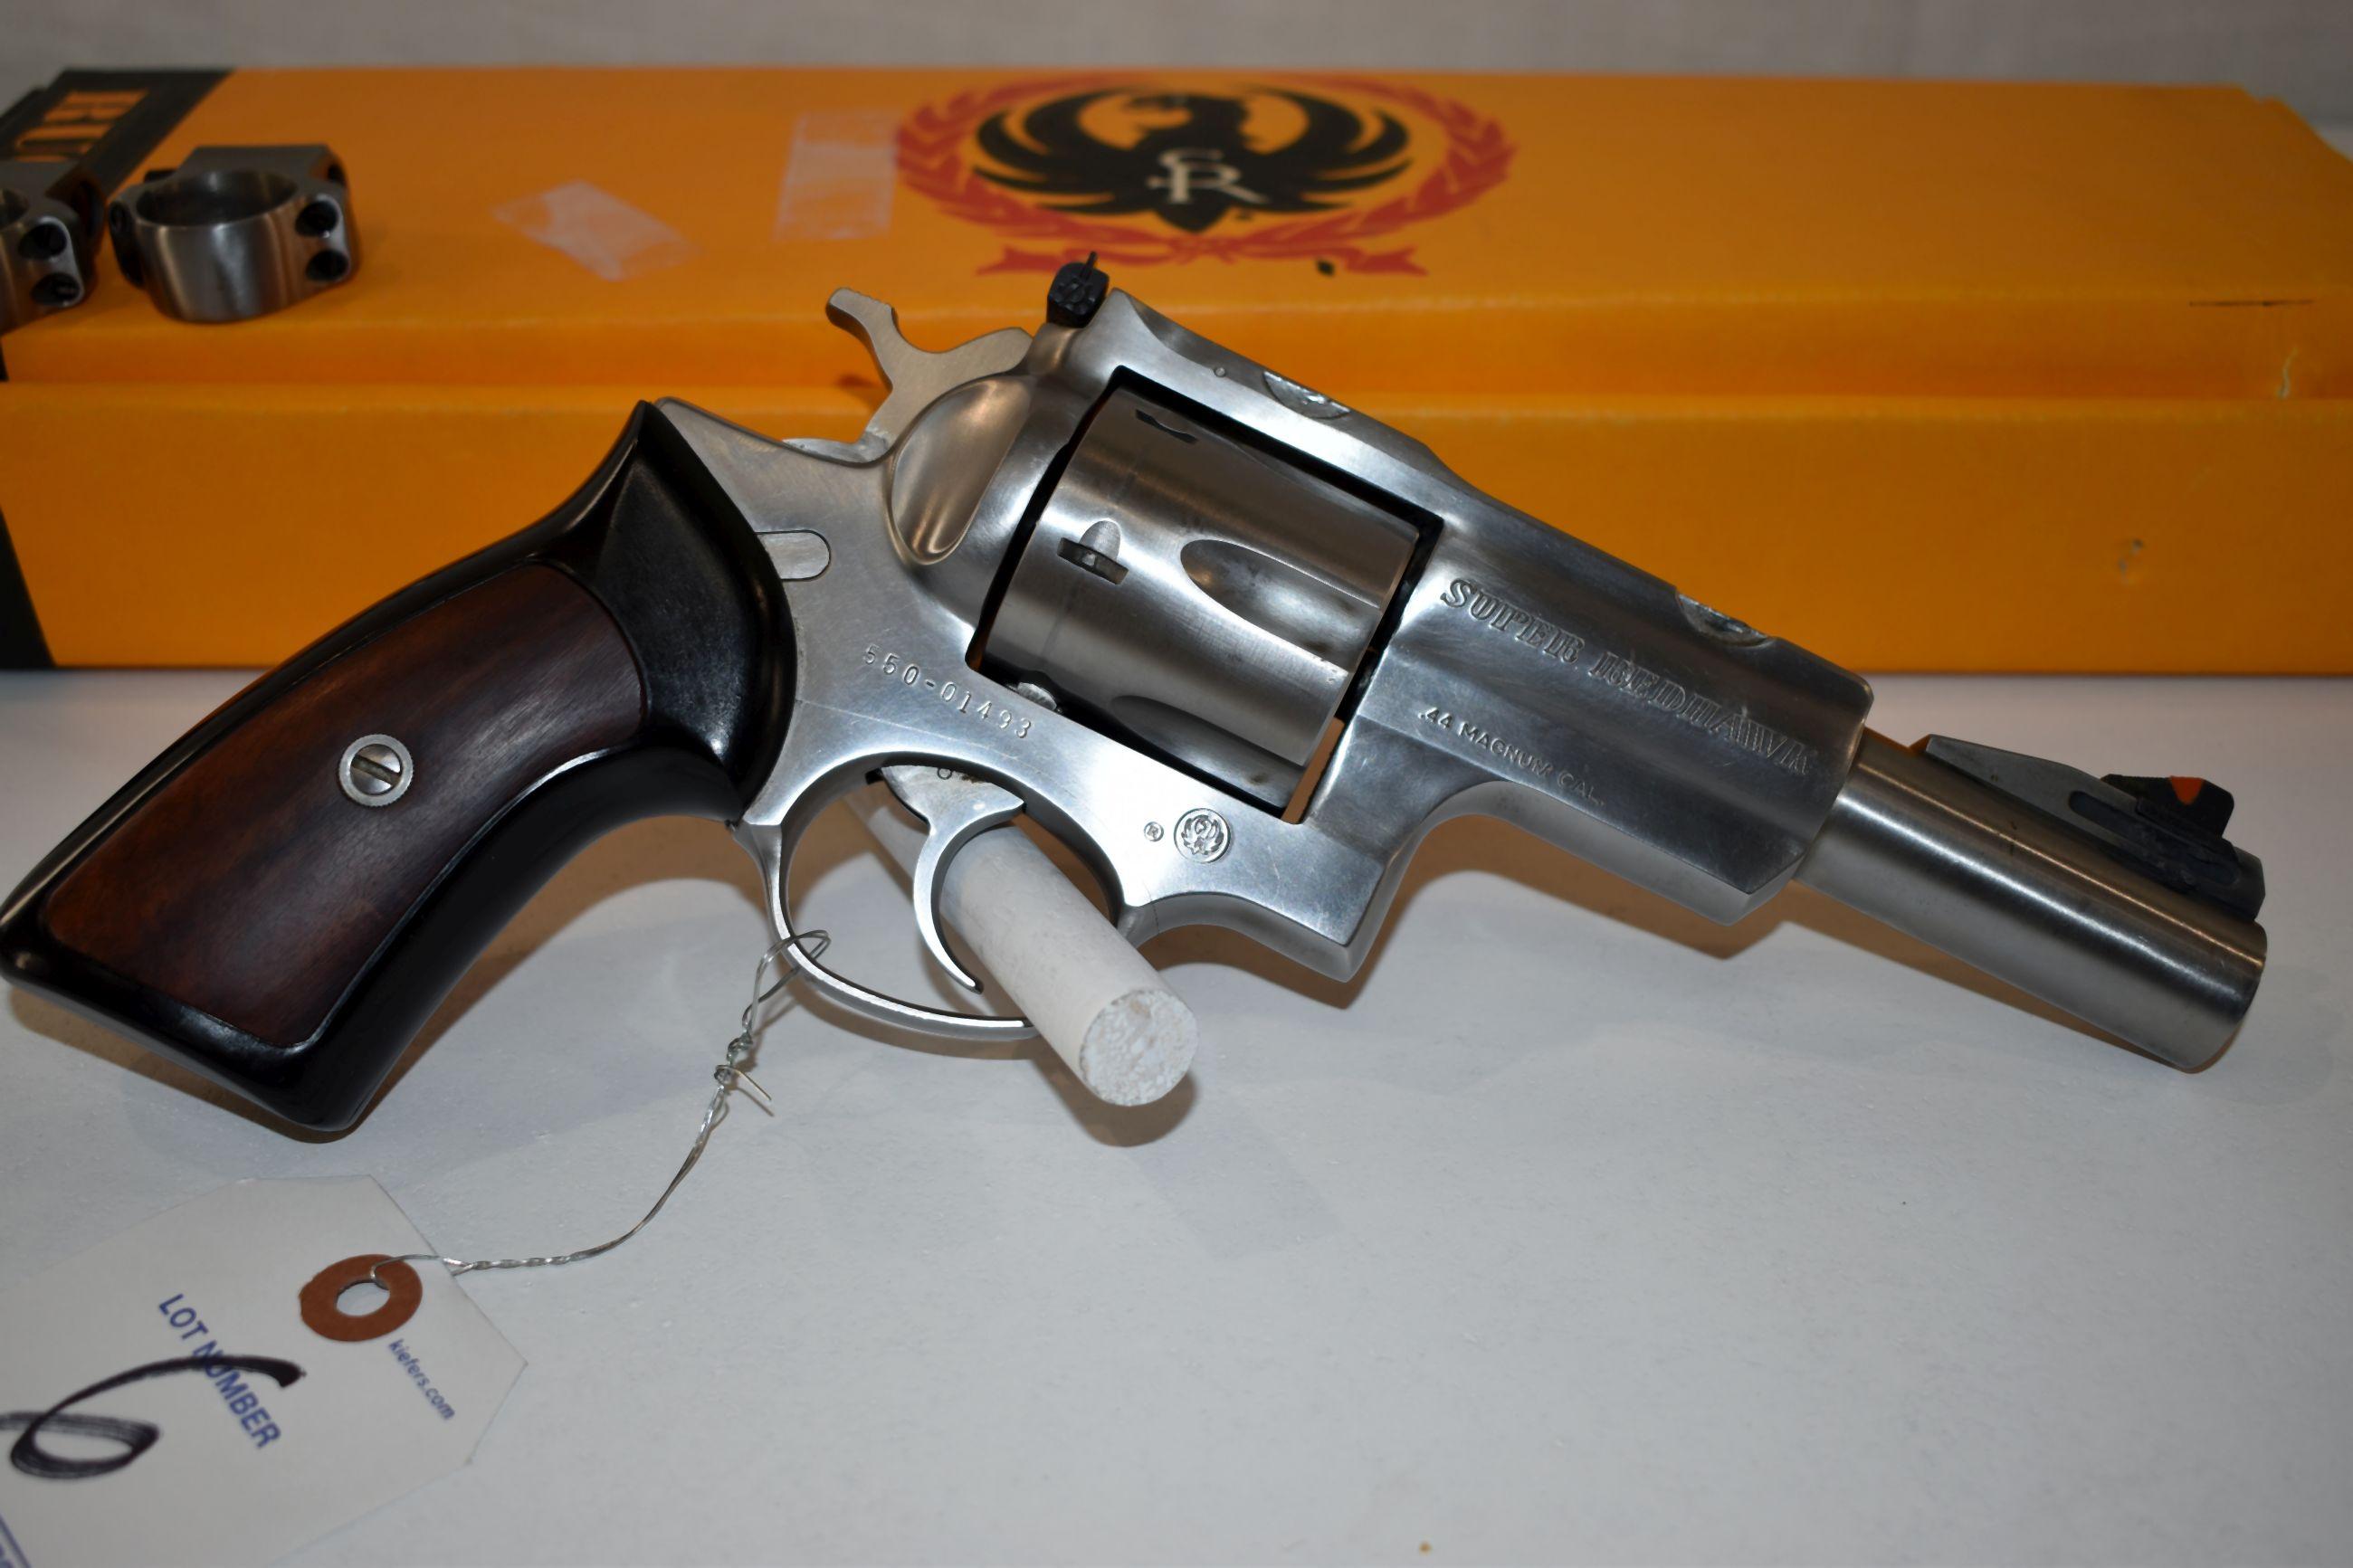 Ruger Super Redhawk 44 Mag Revolver, Stainless, 5" Barrel, SN: 550-01493, scope rings, With Box, box